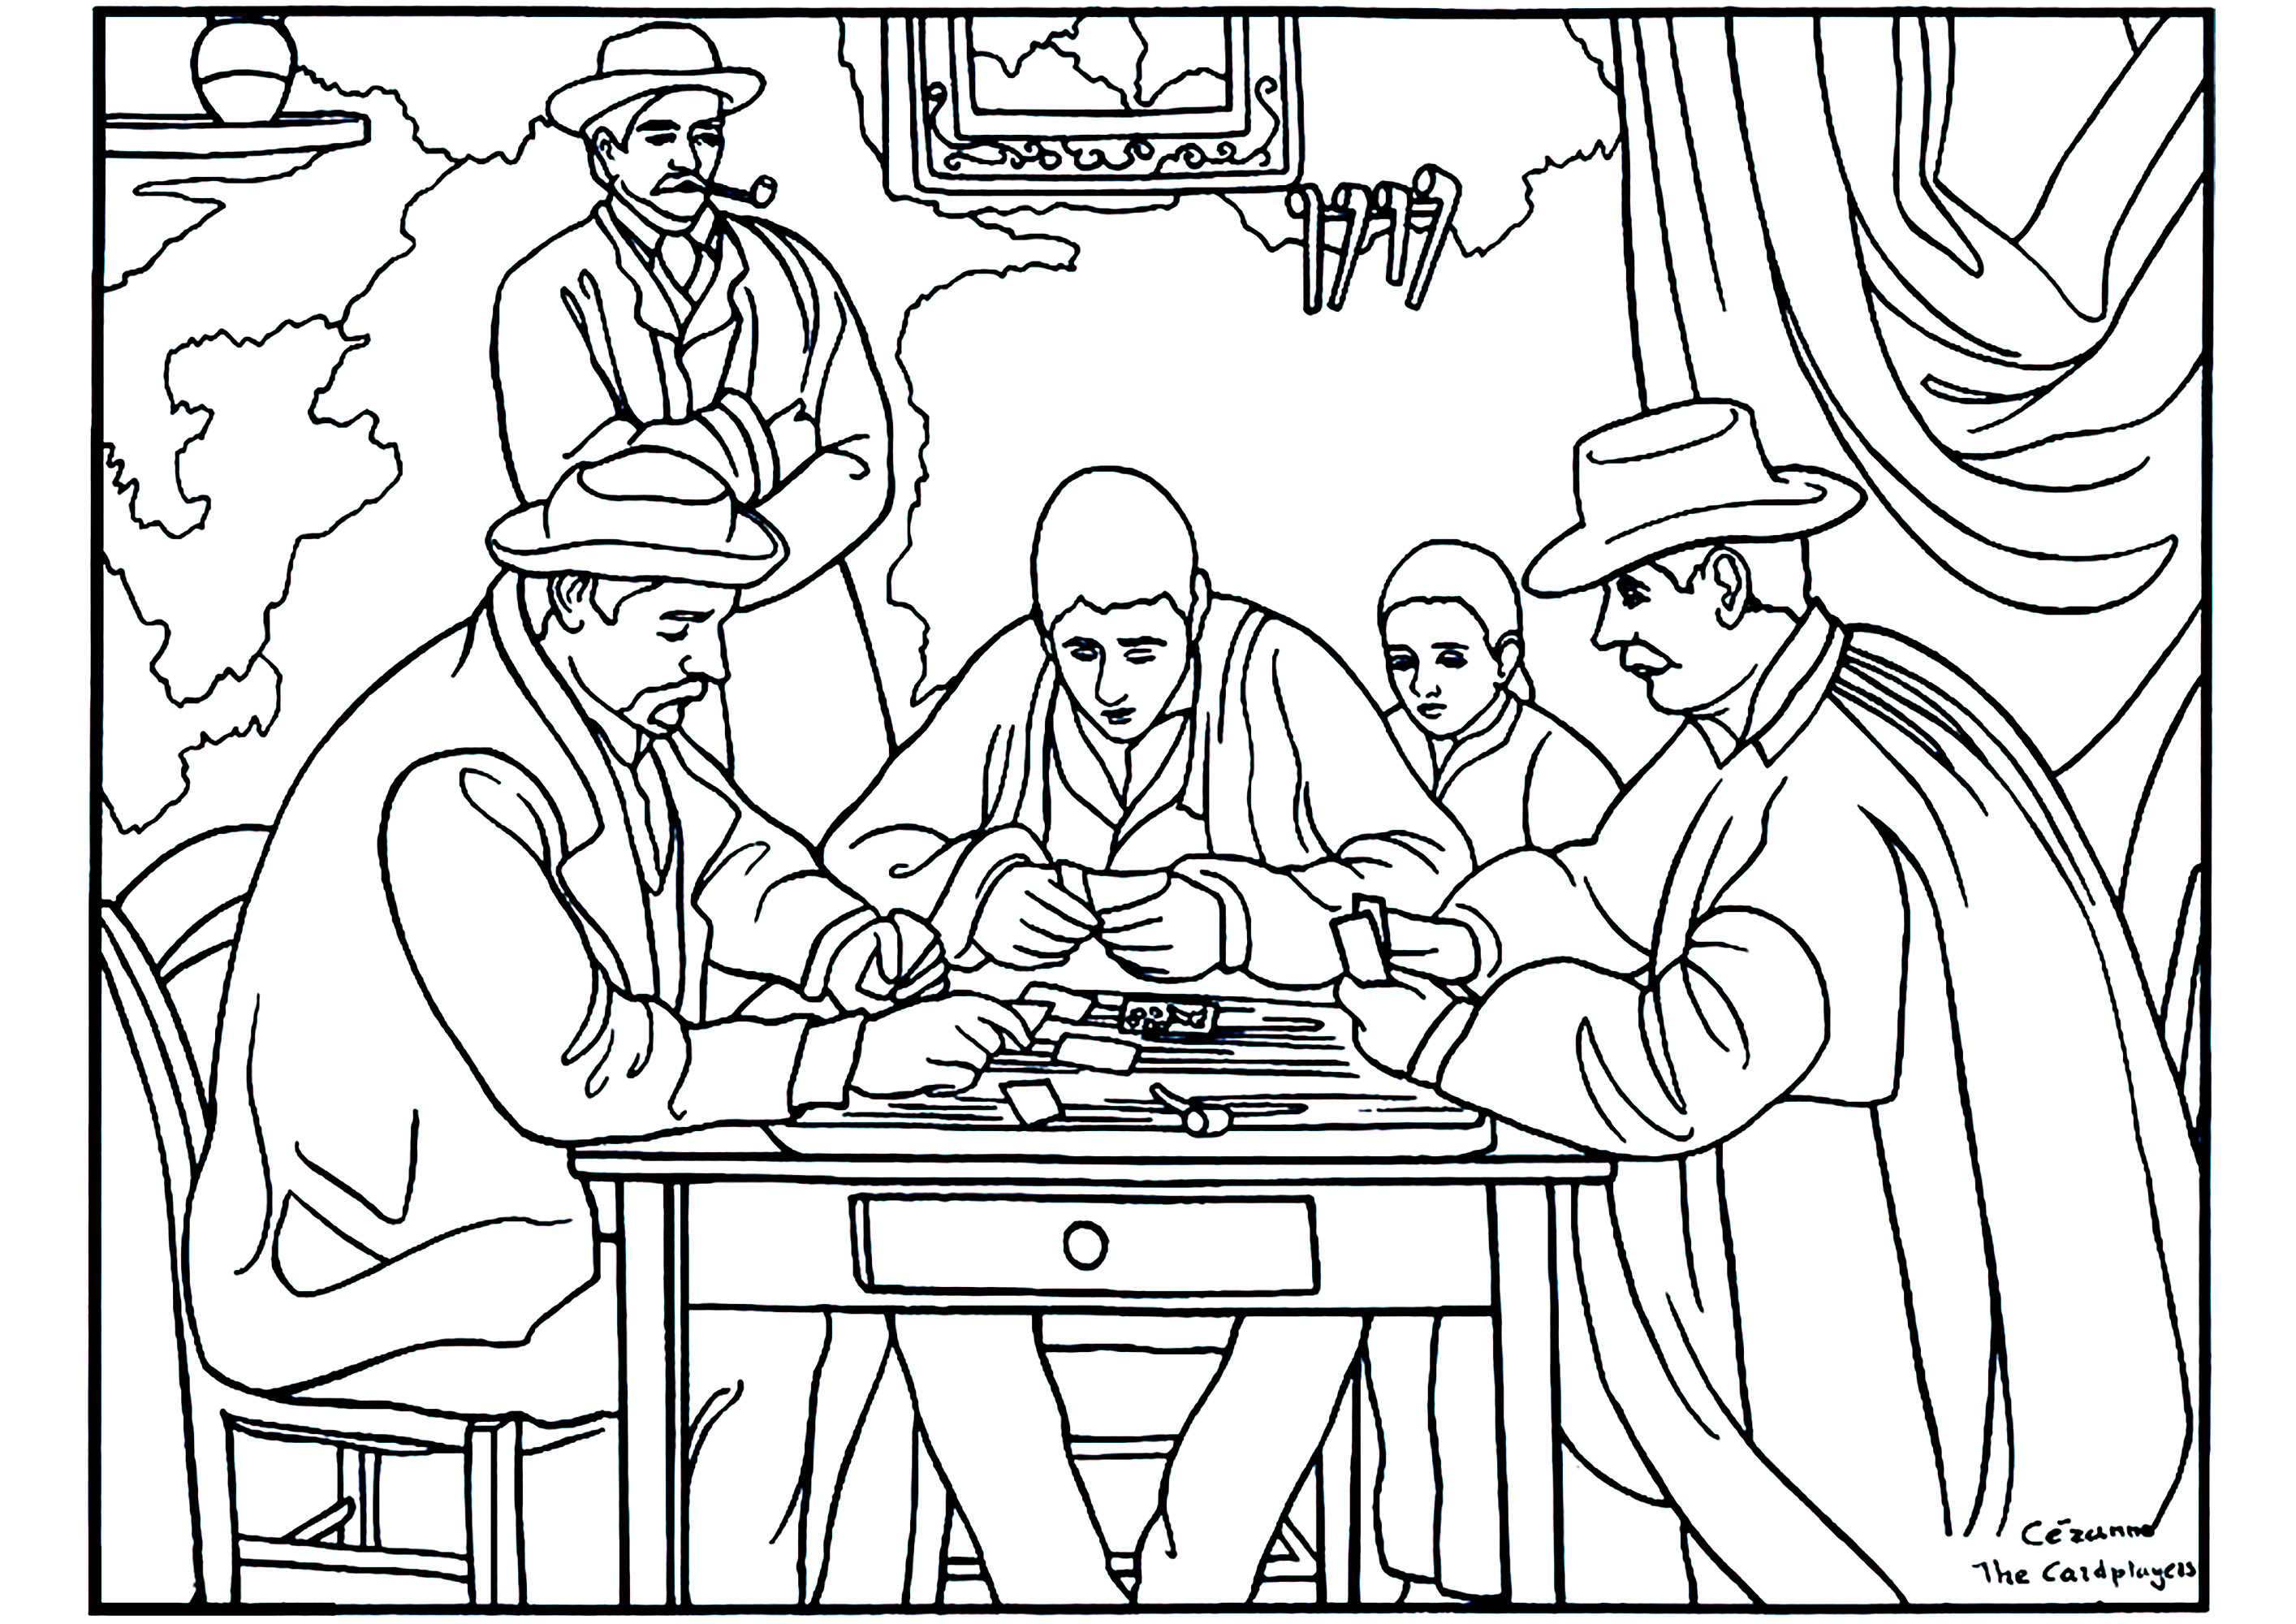 Coloring page inspired by 'The Card Players' by French Post-Impressionist artist Paul Cézanne. Cezanne, born in Aix-en-Provence in 1839, was one of the most important painters of the French post-Impressionist movement rejecting the previously expected straightforward representation of people and nature and putting emphasis on geometric elements and interlocking forms that he saw reality as being constructed from.